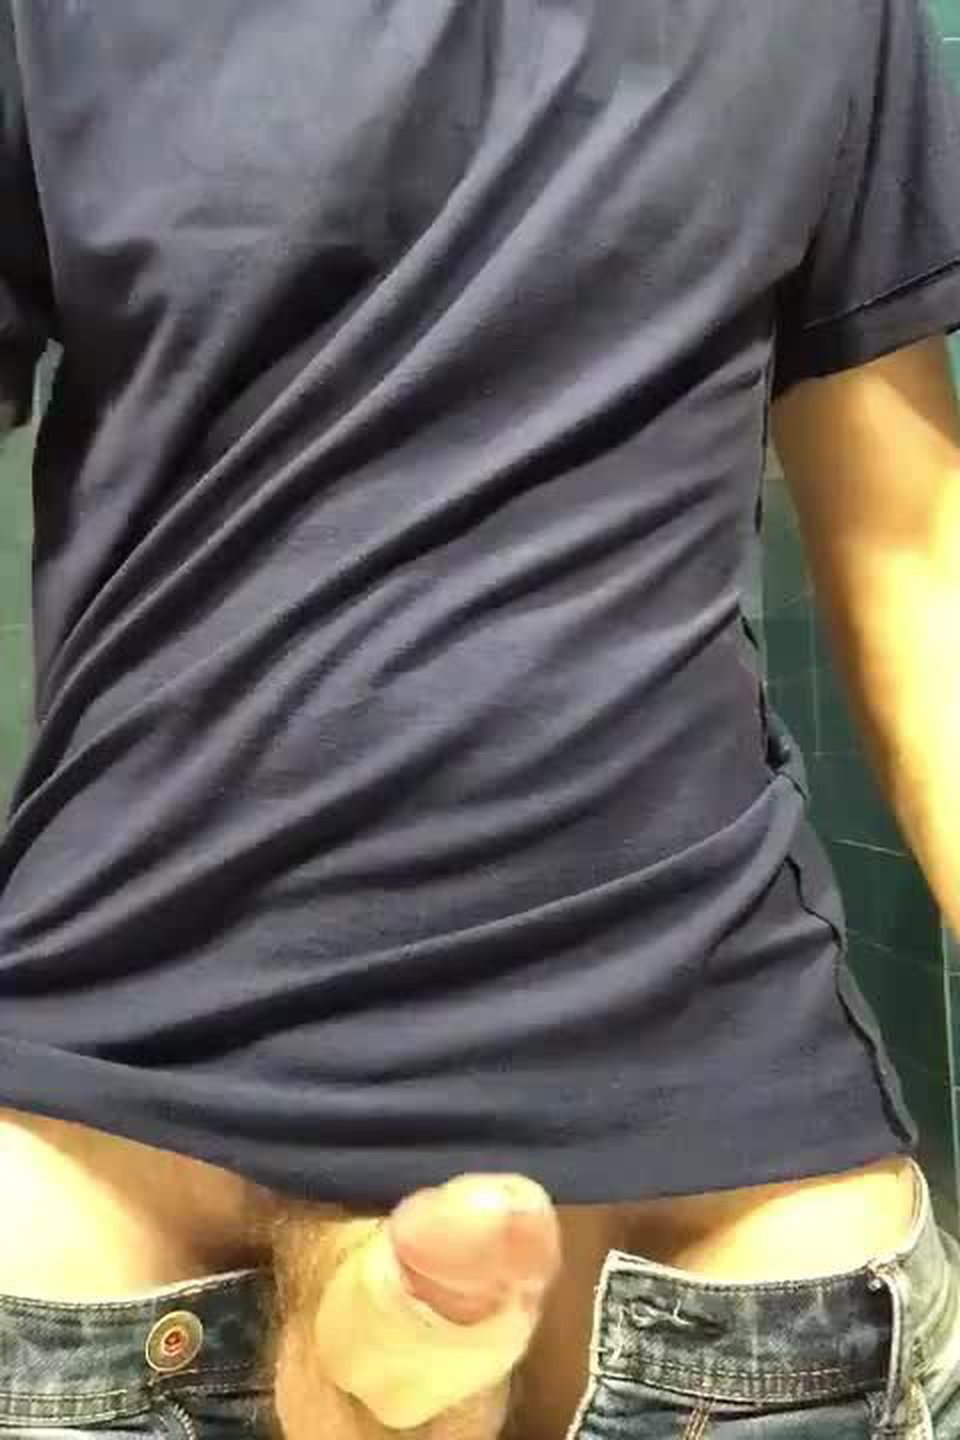 Video post by Ultragay